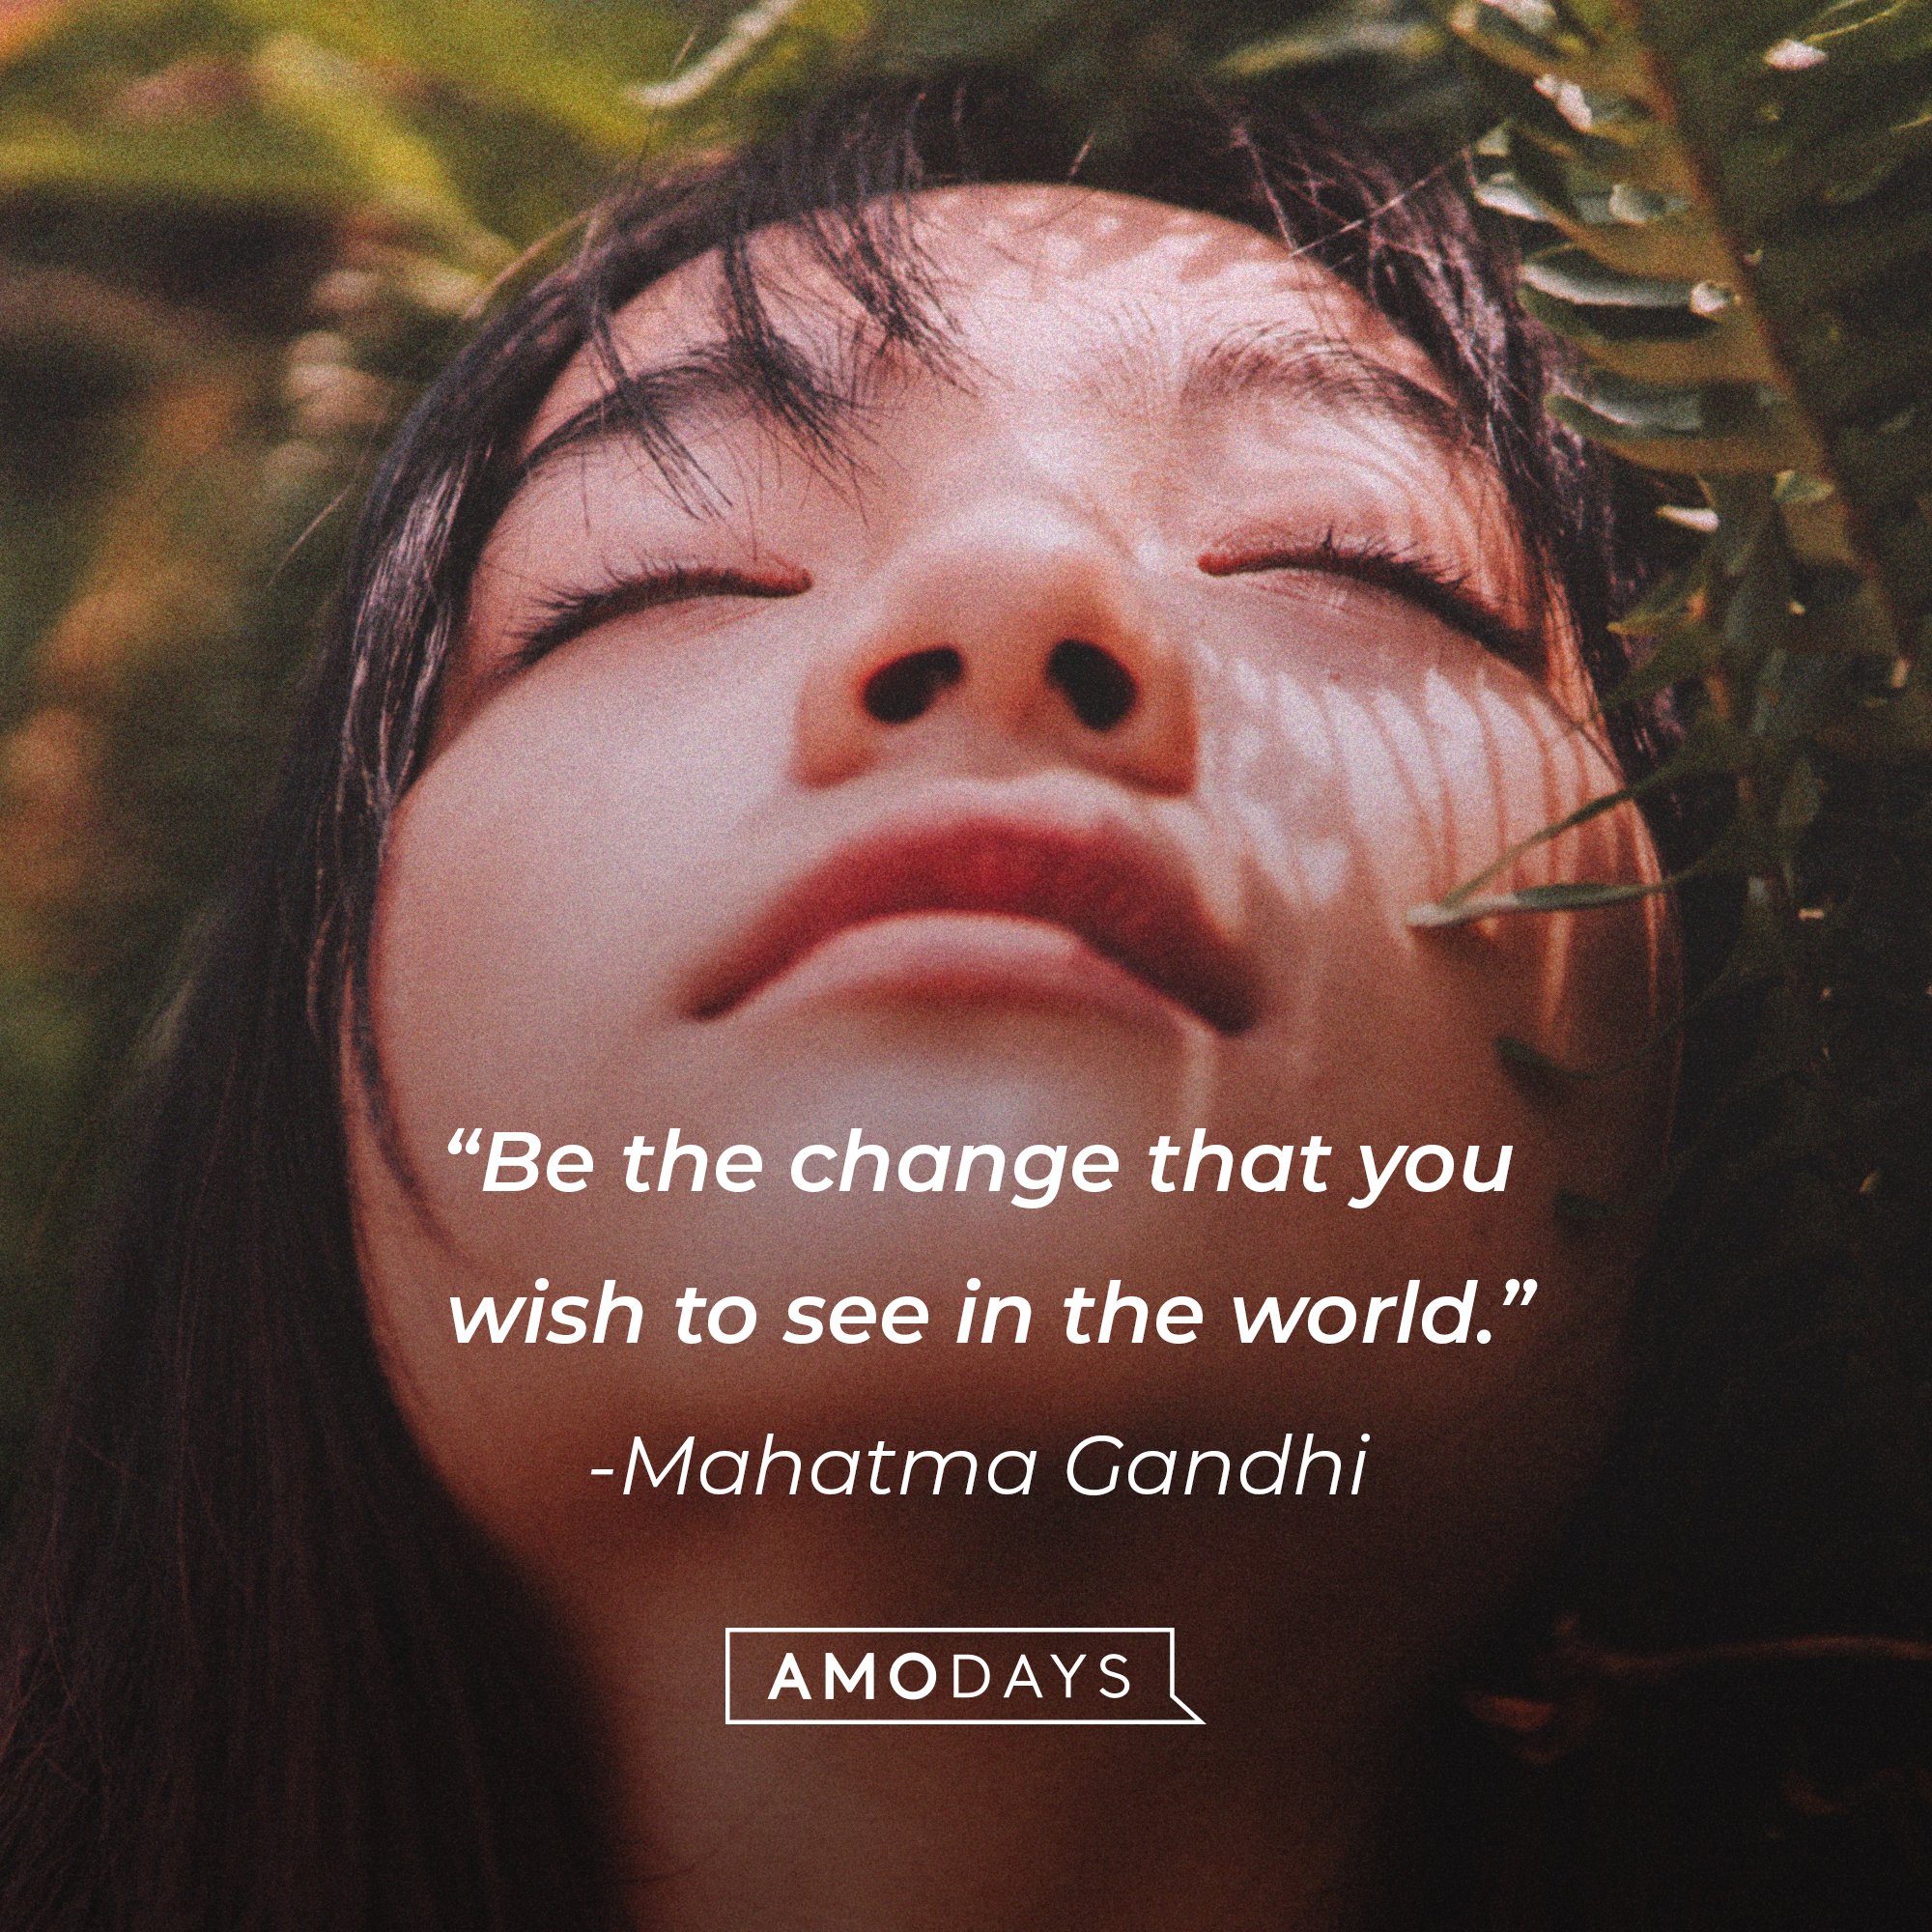 Mahatma Gandhi's quote: “Be the change that you wish to see in the world.” | Image: AmoDays